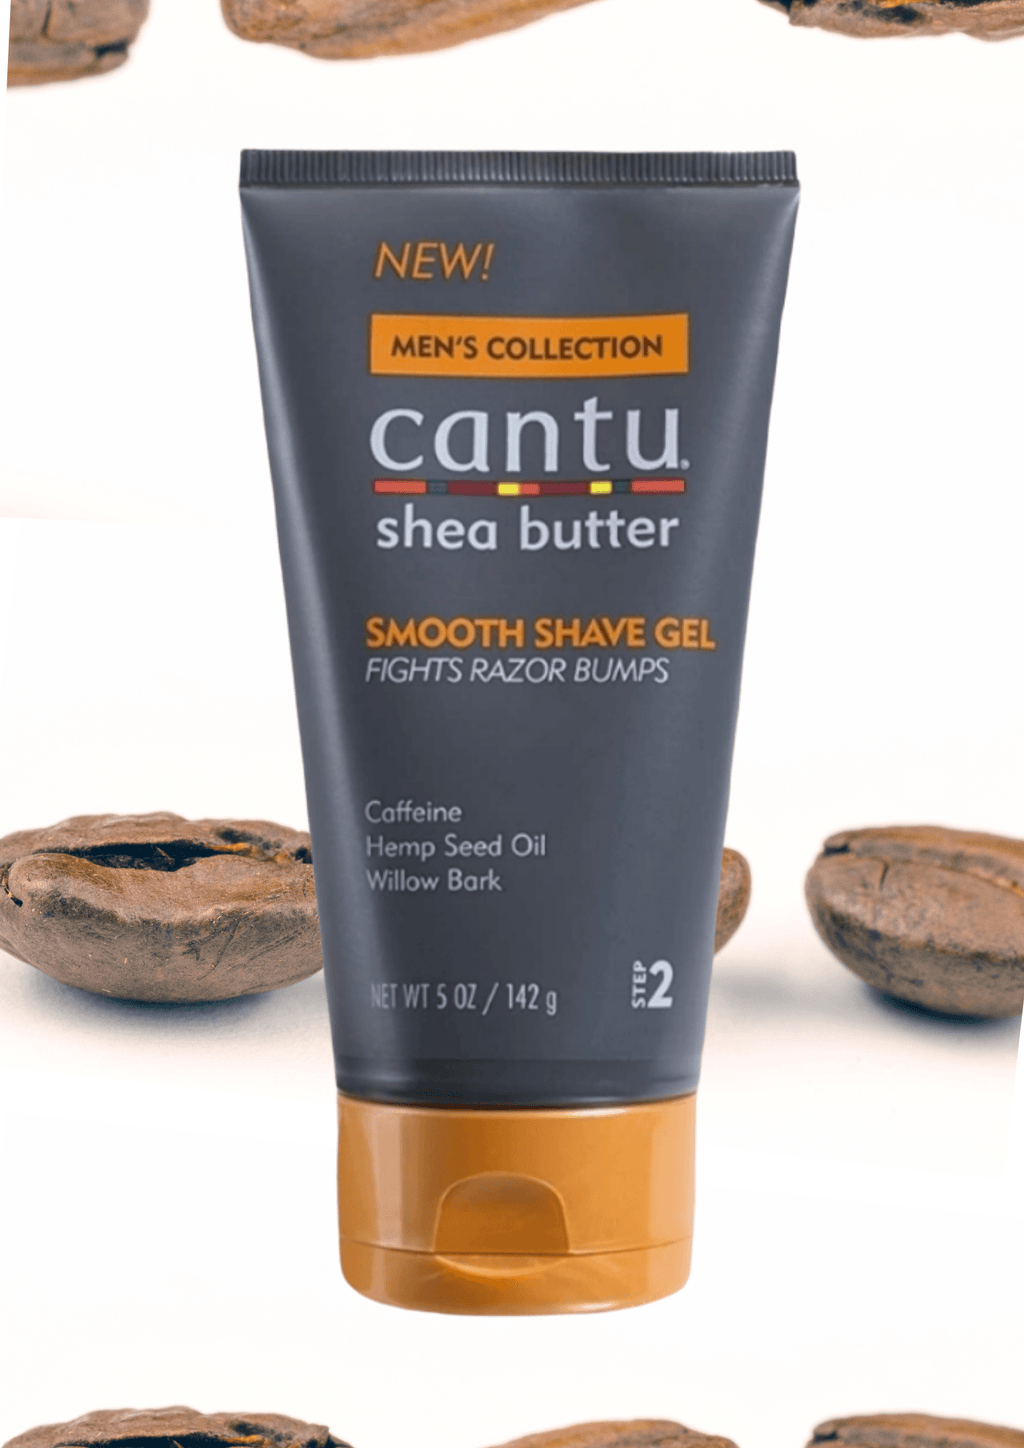 CantuShea ButterSmooth Shave Gel - LocsNco